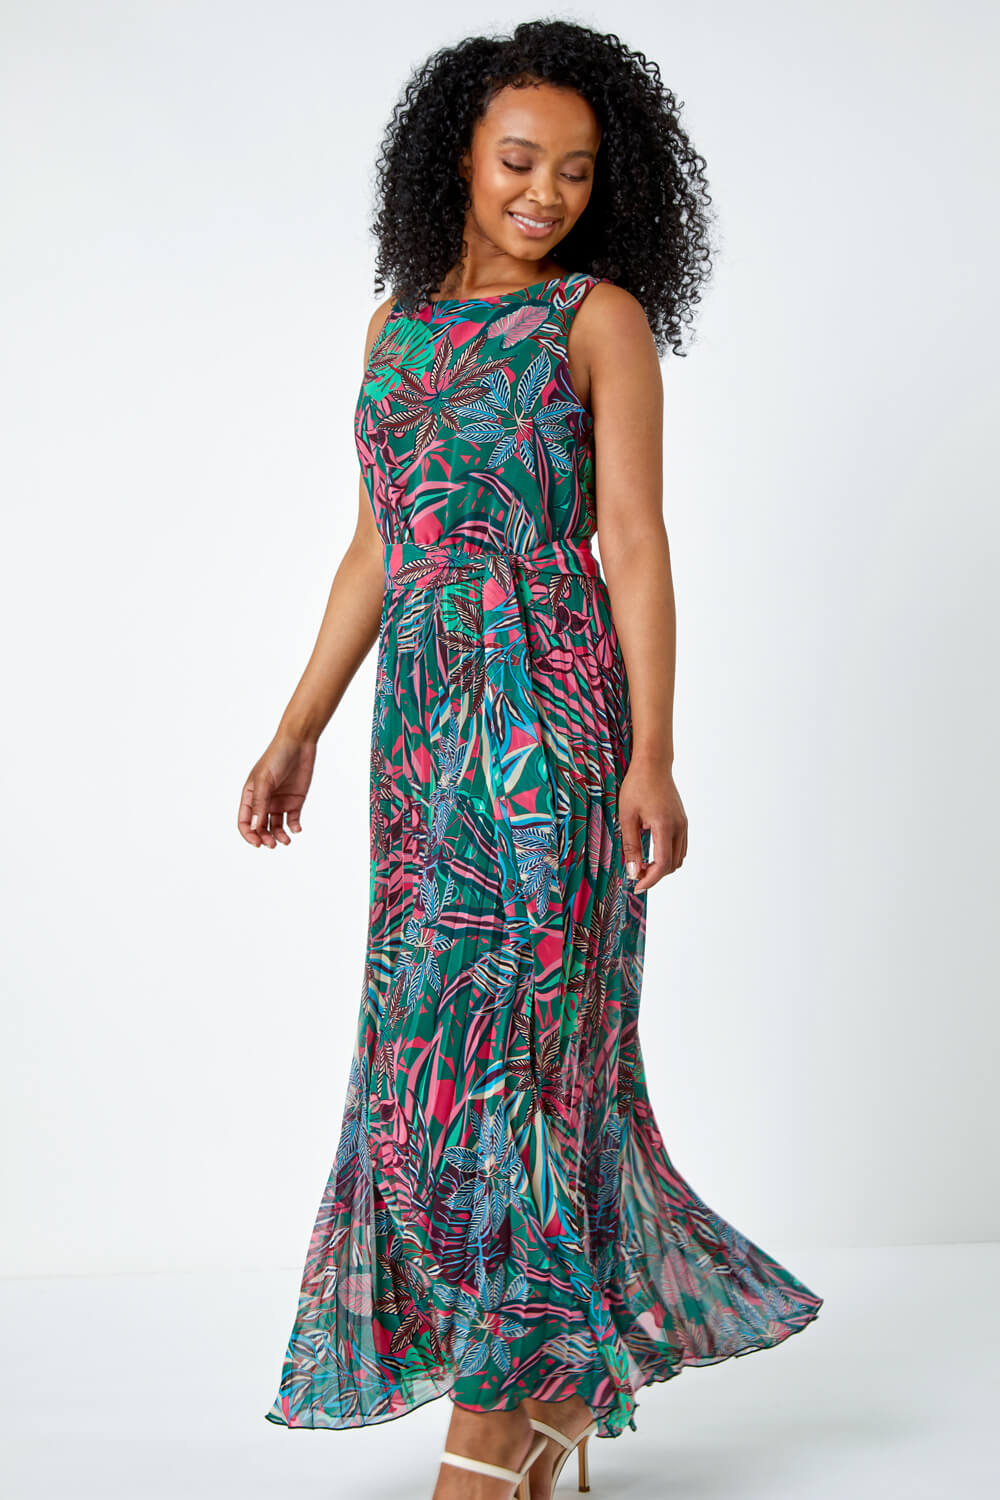 Green Petite Floral Pleated Chiffon Maxi Dress, Image 2 of 5